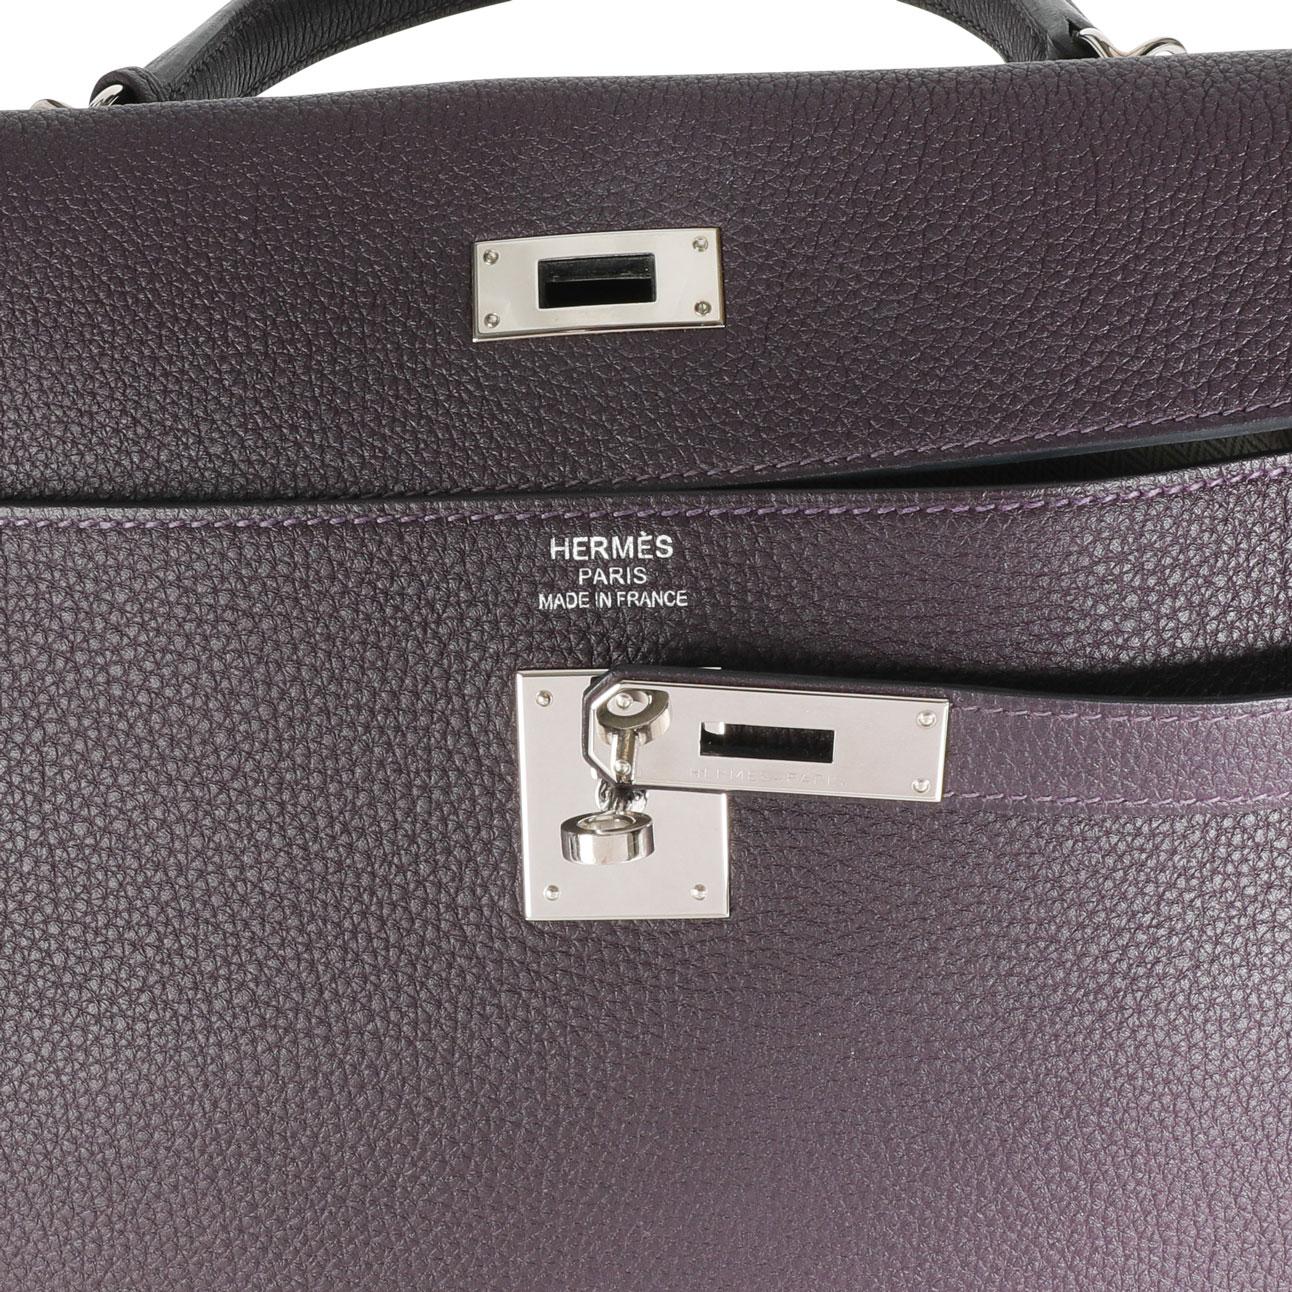  Hermès Raisin Togo Kelly Retourne 35 PHW
SKU: 111993
MSRP:  
Condition: Pre-owned (3000)
Condition Description: 
Handbag Condition: Very Good
Condition Comments: Very Good Condition. Plastic on some hardware. Faint marks to exterior. Light scuffing